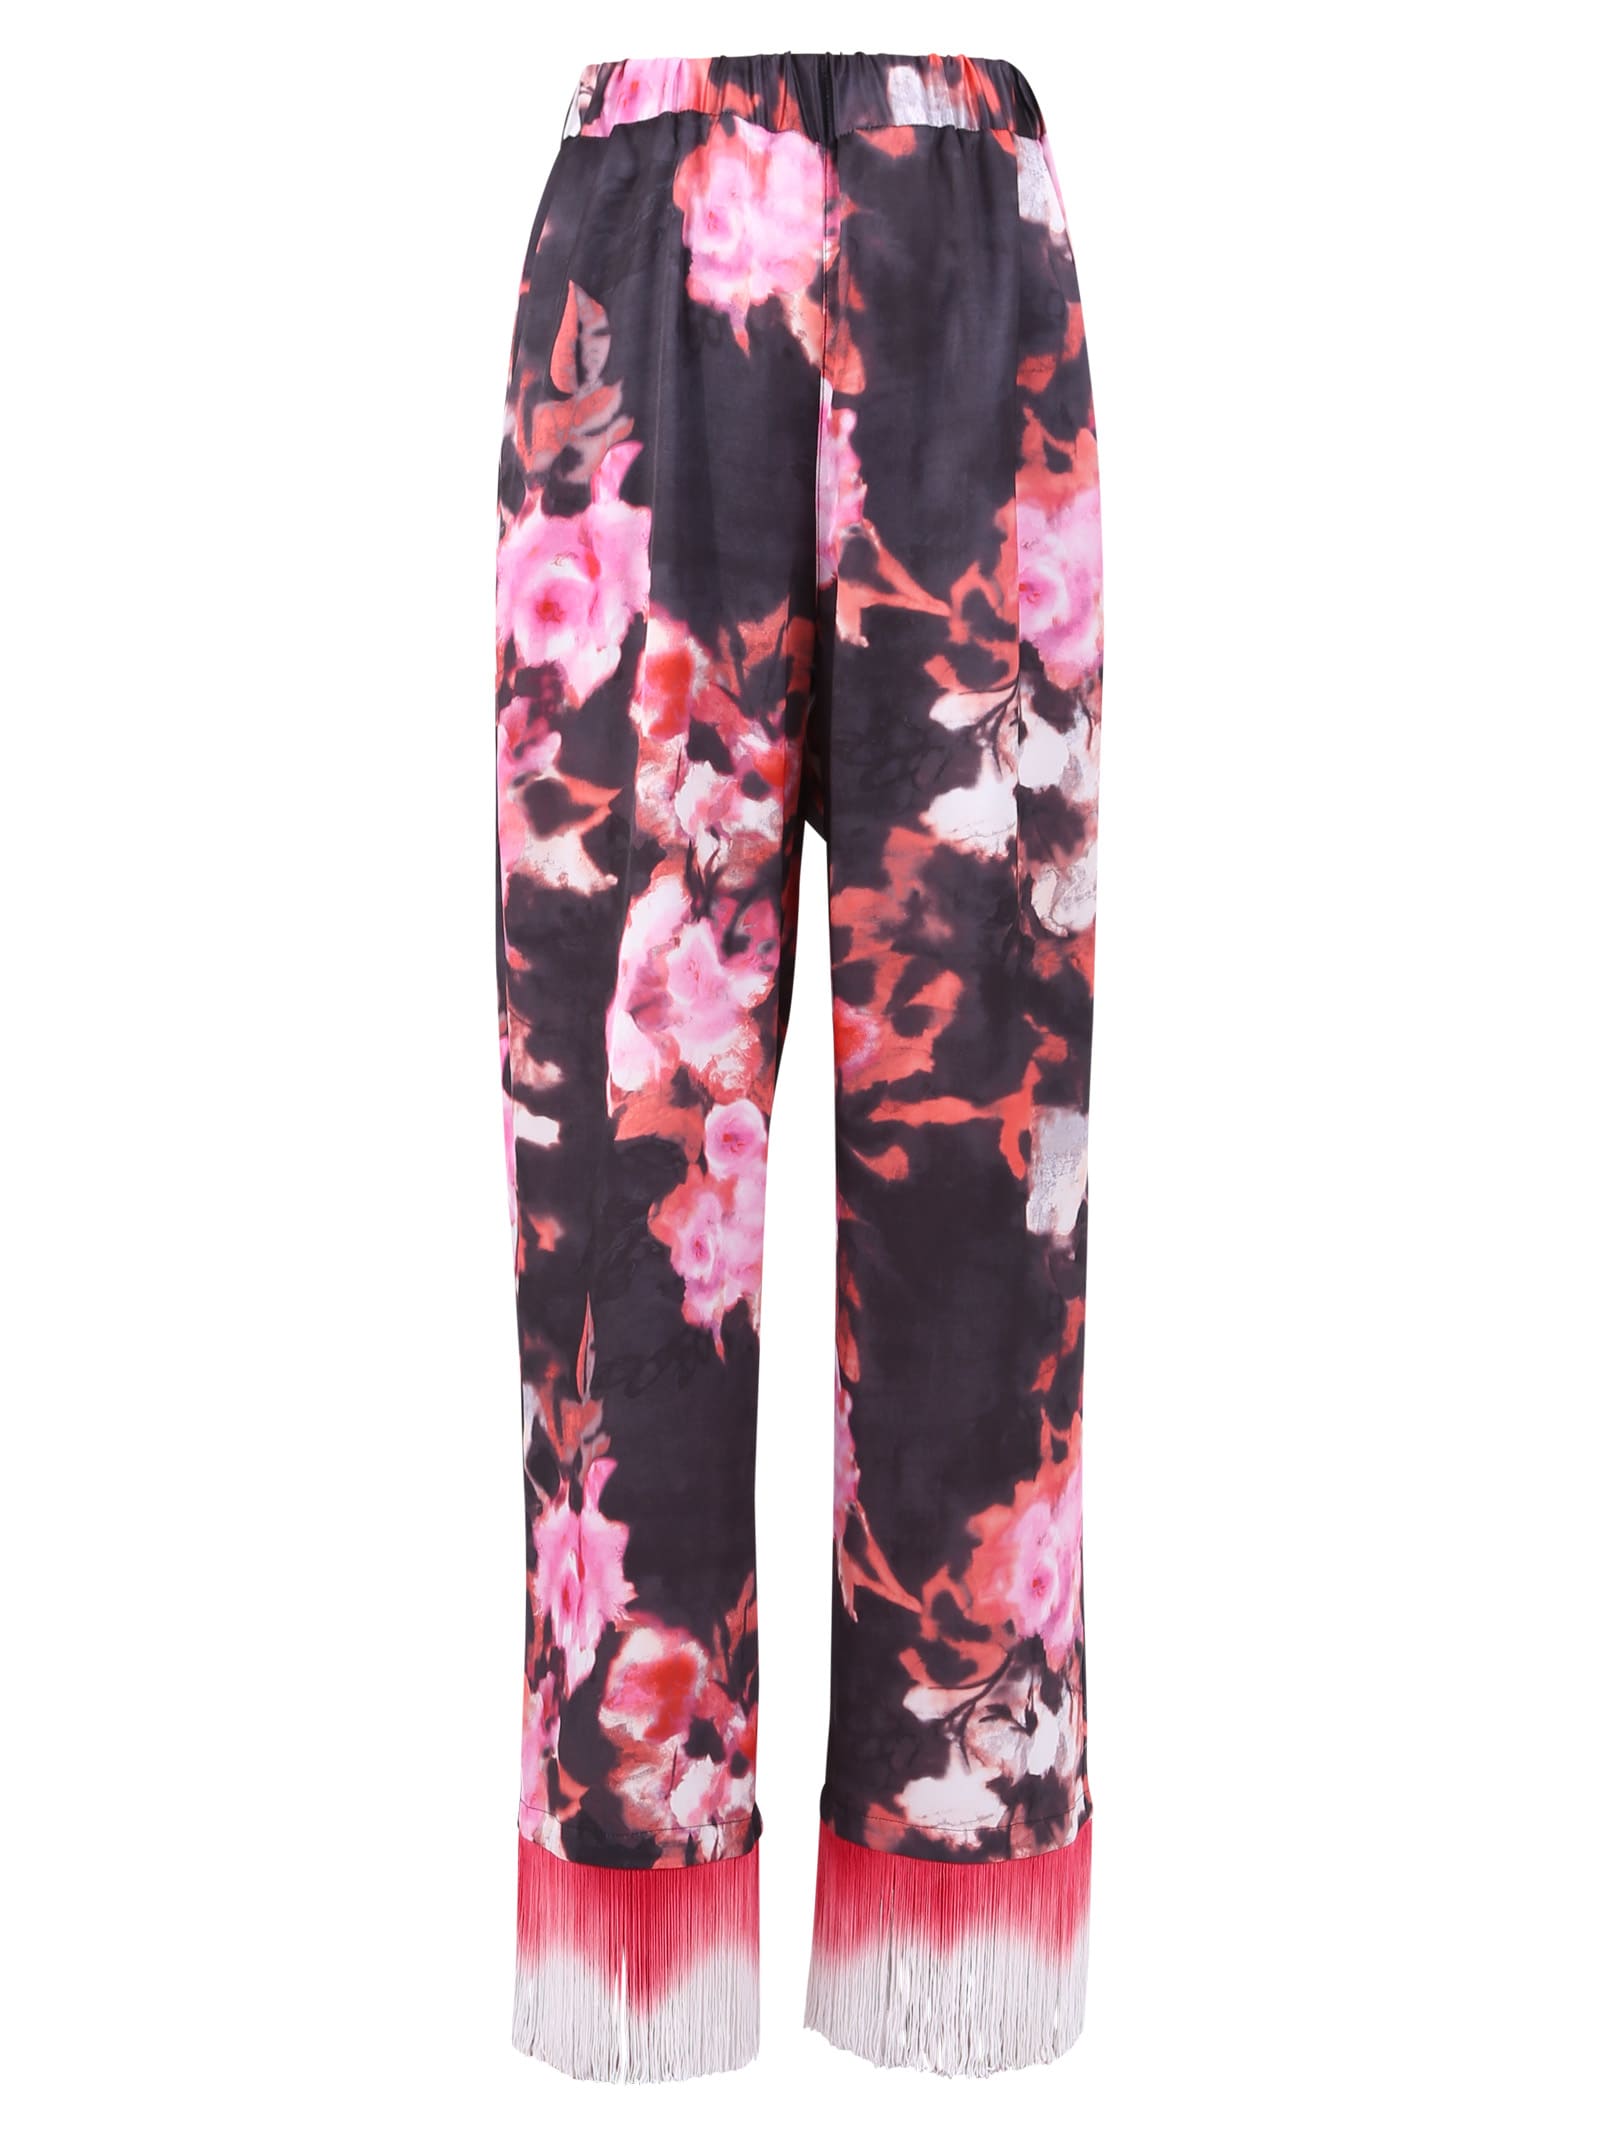 MSGM FLORAL PRINT TROUSERS,11205709